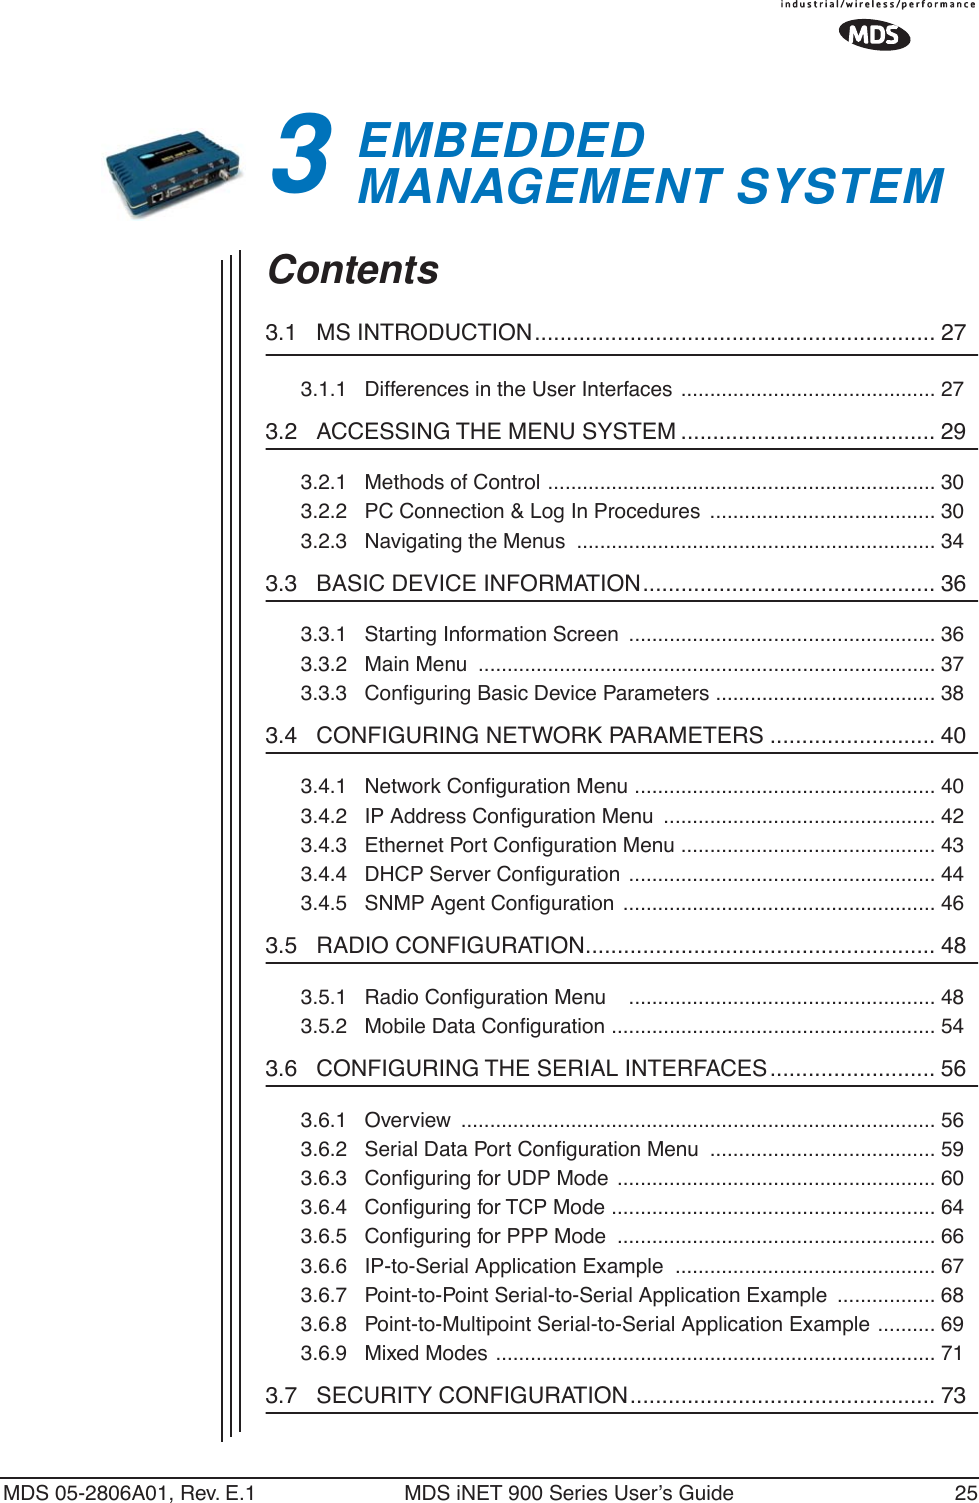 MDS 05-2806A01, Rev. E.1 MDS iNET 900 Series User’s Guide 253EMBEDDED MANAGEMENT SYSTEM3 Chapter Counter Reset ParagraphContents3.1   MS INTRODUCTION............................................................... 273.1.1   Differences in the User Interfaces  ............................................ 273.2   ACCESSING THE MENU SYSTEM ........................................ 293.2.1   Methods of Control ................................................................... 303.2.2   PC Connection &amp; Log In Procedures  ....................................... 303.2.3   Navigating the Menus  .............................................................. 343.3   BASIC DEVICE INFORMATION.............................................. 363.3.1   Starting Information Screen  ..................................................... 363.3.2   Main Menu  ............................................................................... 373.3.3   Conﬁguring Basic Device Parameters ...................................... 383.4   CONFIGURING NETWORK PARAMETERS .......................... 403.4.1   Network Conﬁguration Menu .................................................... 403.4.2   IP Address Conﬁguration Menu  ............................................... 423.4.3   Ethernet Port Conﬁguration Menu ............................................ 433.4.4   DHCP Server Conﬁguration ..................................................... 443.4.5   SNMP Agent Conﬁguration ...................................................... 463.5   RADIO CONFIGURATION....................................................... 483.5.1   Radio Conﬁguration Menu    ..................................................... 483.5.2   Mobile Data Conﬁguration ........................................................ 543.6   CONFIGURING THE SERIAL INTERFACES.......................... 563.6.1   Overview  .................................................................................. 563.6.2   Serial Data Port Conﬁguration Menu  ....................................... 593.6.3   Conﬁguring for UDP Mode ....................................................... 603.6.4   Conﬁguring for TCP Mode ........................................................ 643.6.5   Conﬁguring for PPP Mode  ....................................................... 663.6.6   IP-to-Serial Application Example  ............................................. 673.6.7   Point-to-Point Serial-to-Serial Application Example  ................. 683.6.8   Point-to-Multipoint Serial-to-Serial Application Example .......... 693.6.9   Mixed Modes ............................................................................ 713.7   SECURITY CONFIGURATION................................................ 73